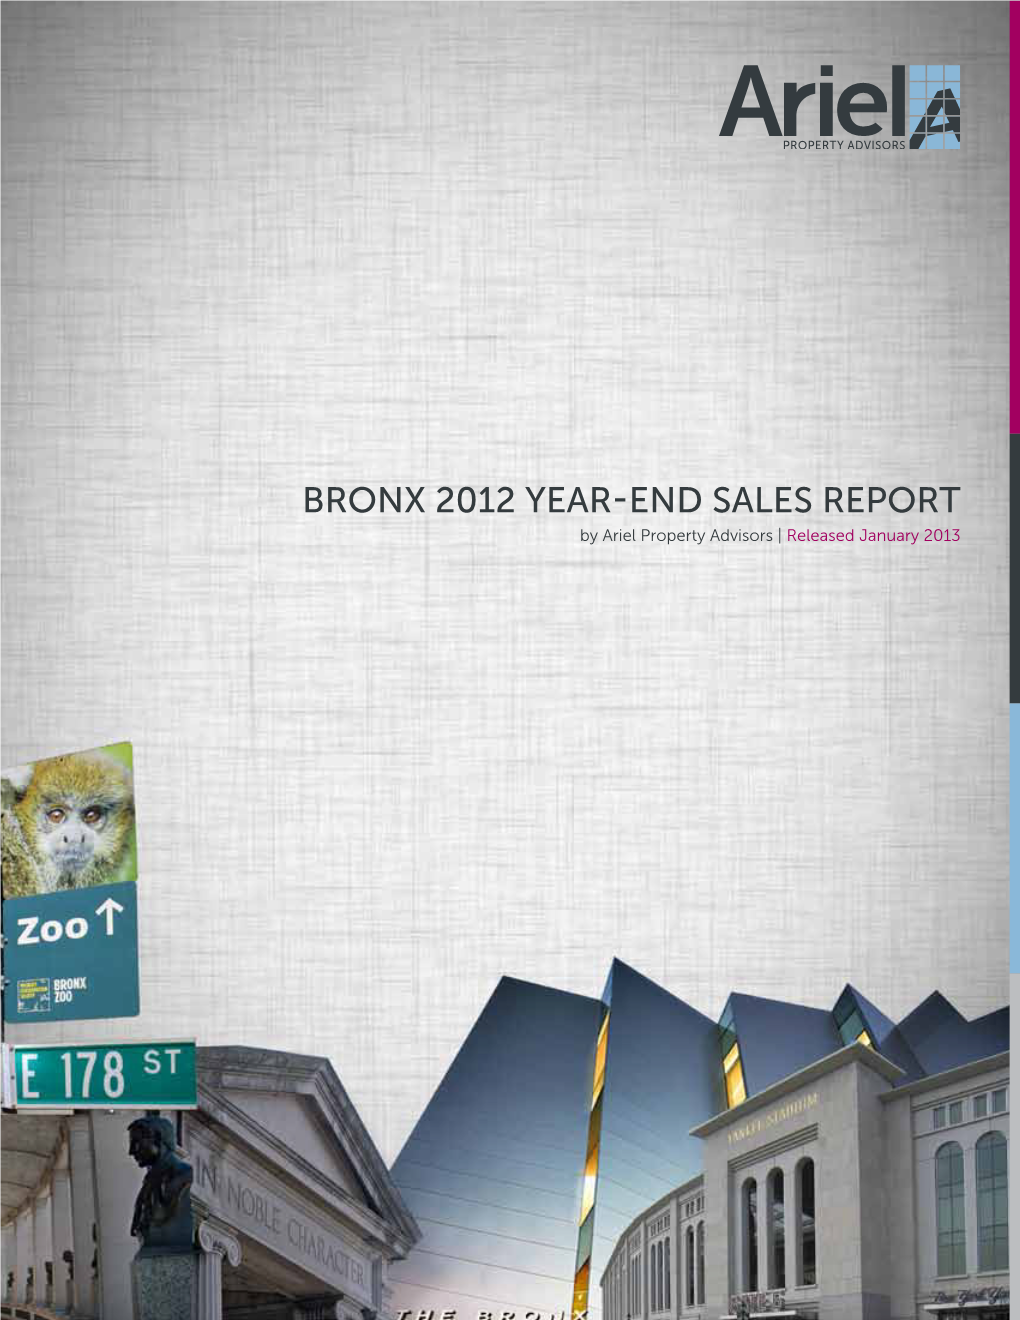 Bronx 2012 Year-End Sales Report by Ariel Property Advisors | Released January 2013 Bronx 2012 Year-End Sales Report